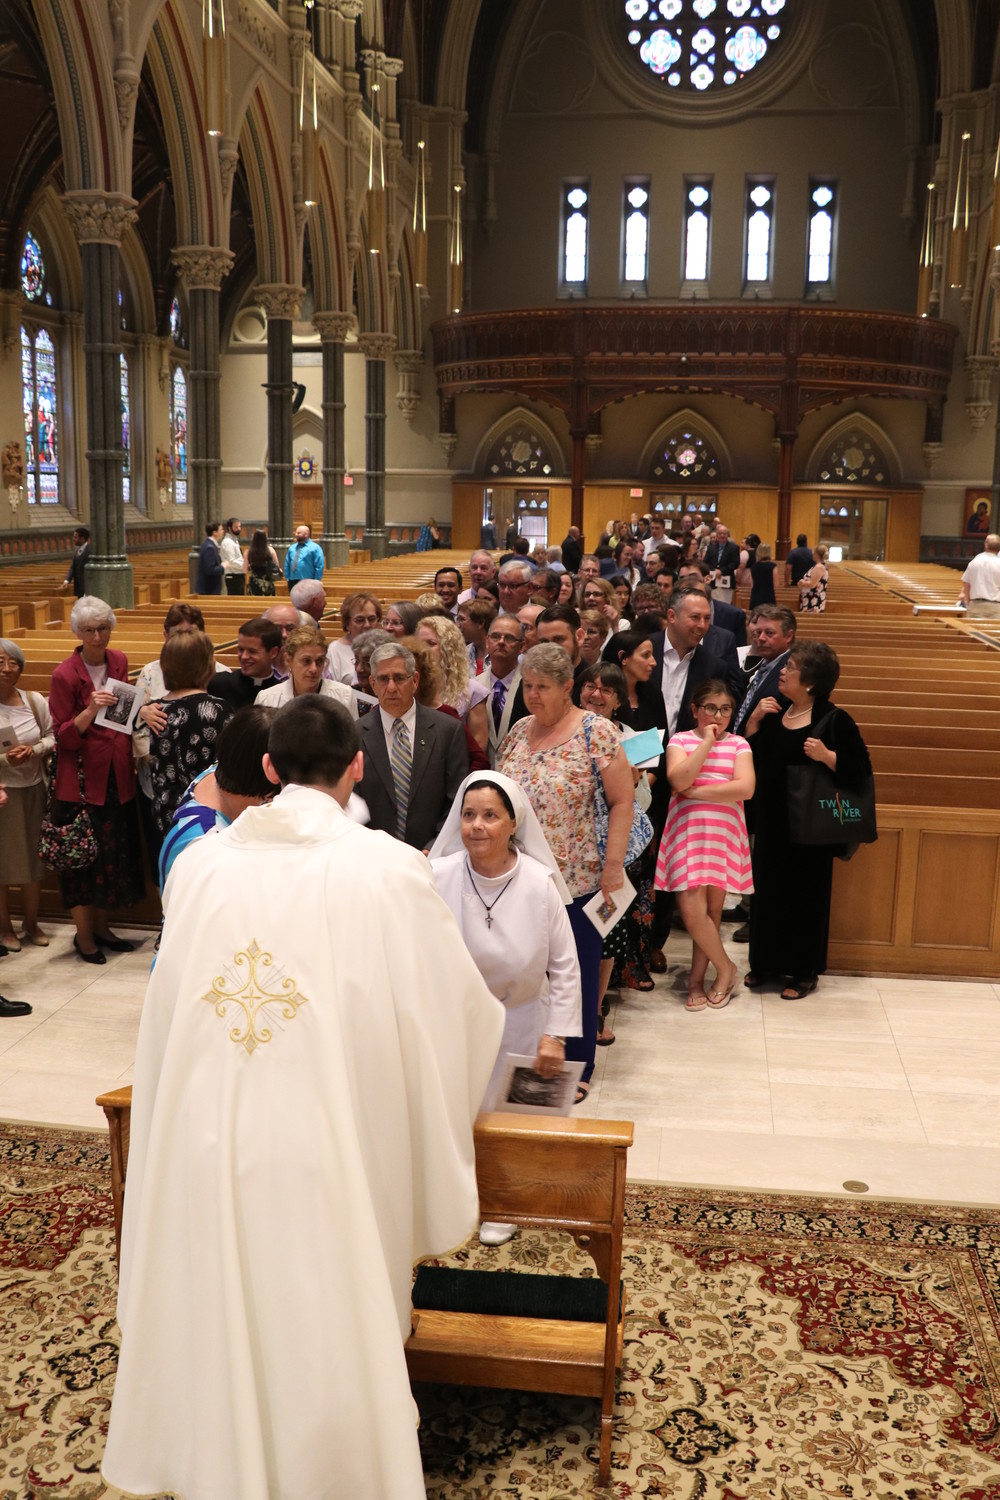 Following the Mass, Father Dufour confers individual blessings upon those gathered.